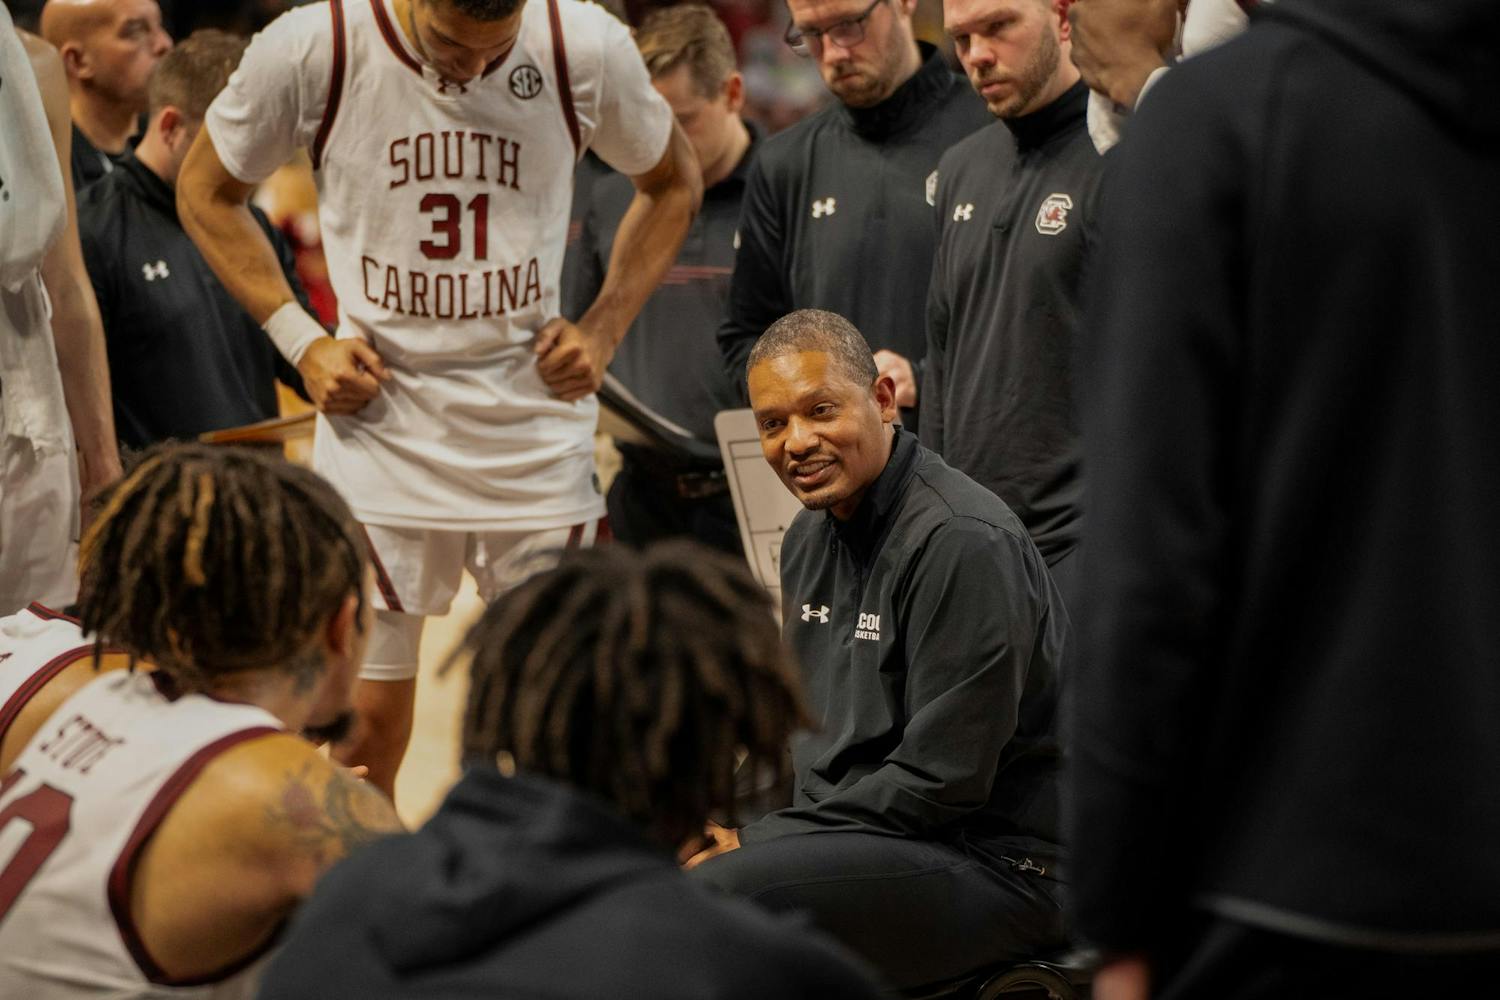 Men's basketball head coach Lamont Paris talks to his players on Nov. 13 during their 74-64 victory over Virginia Military Institute. During his seventh 鶹С򽴫ý as a collegiate head coach, Paris has led the Gamecocks to a 13-1 start.